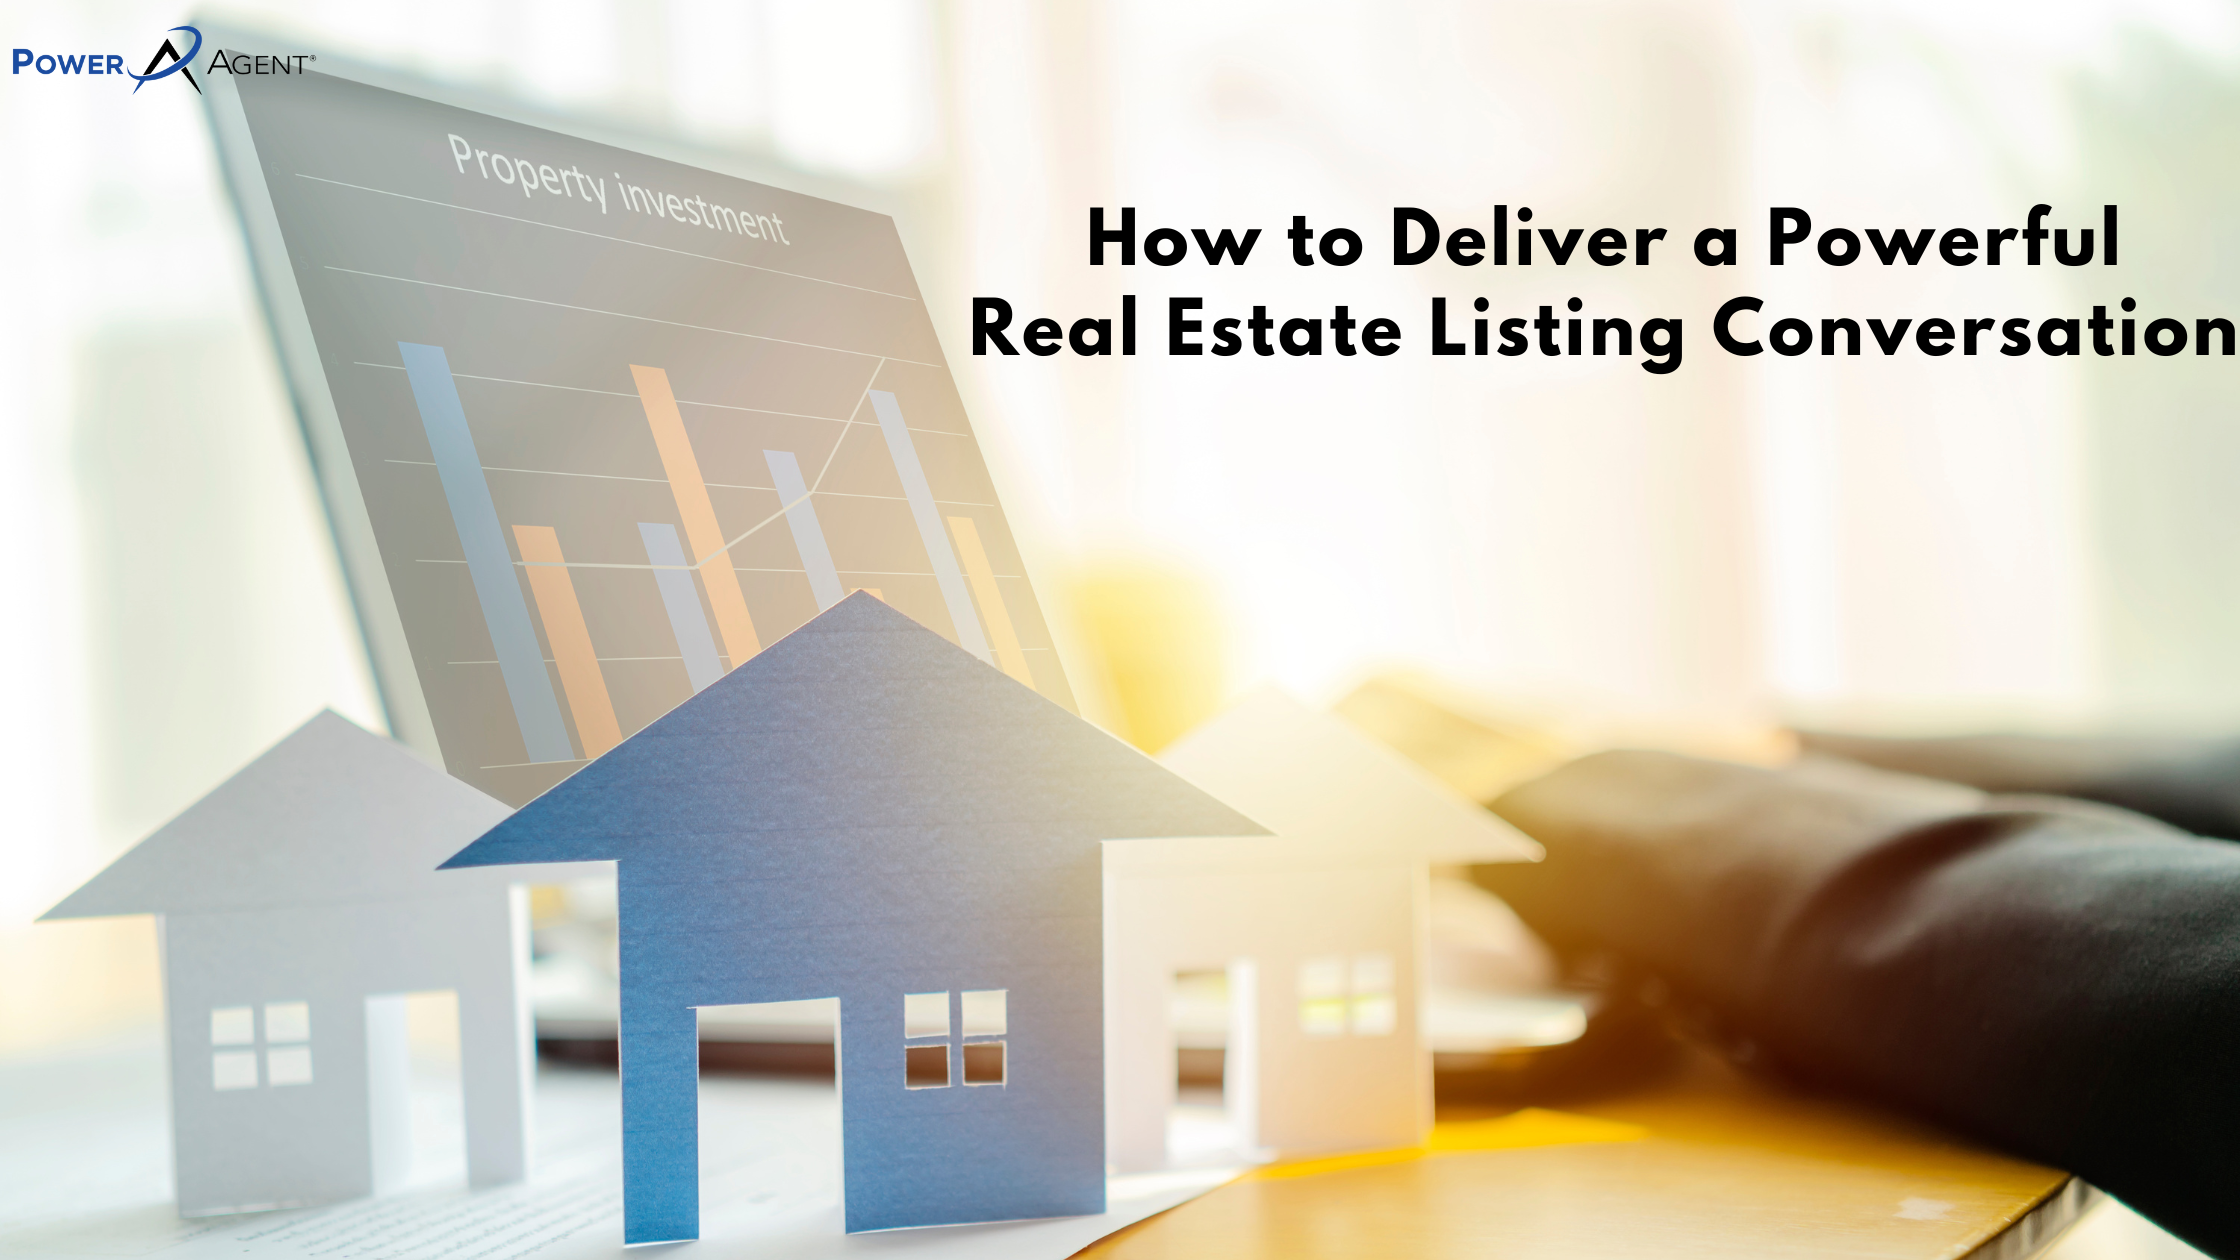 How to Deliver a Powerful Real Estate Listing Presentation